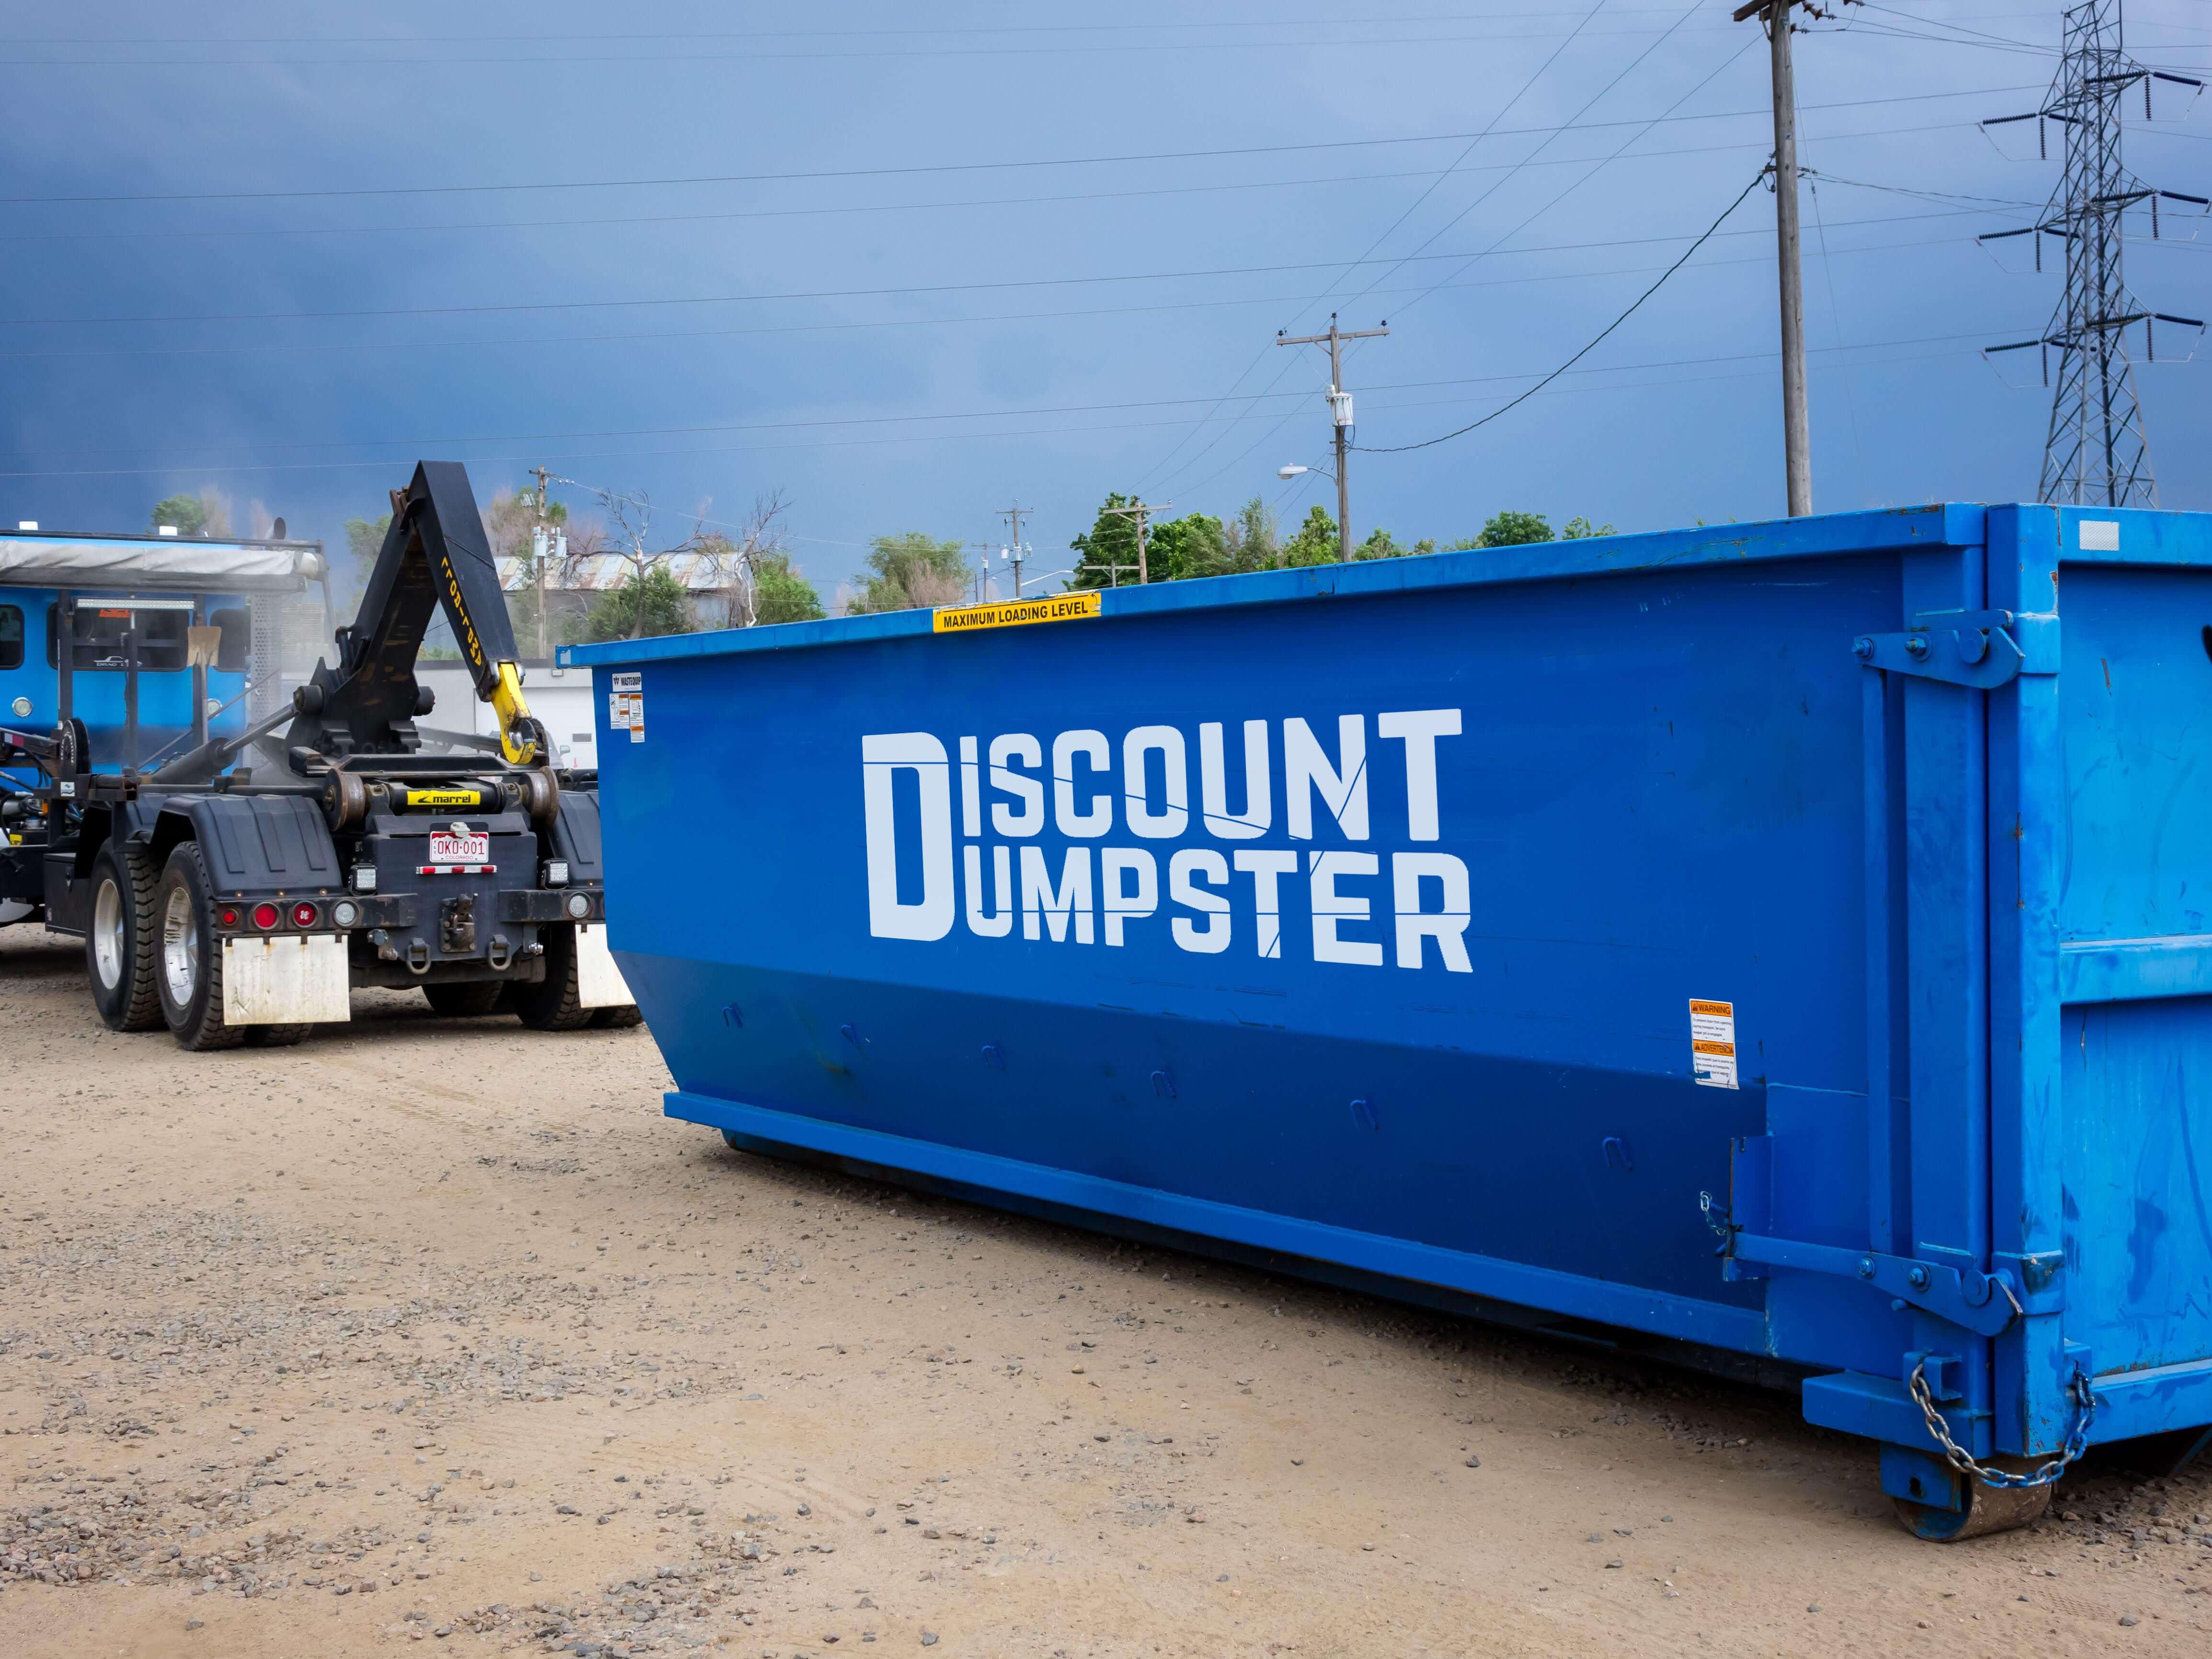 Discount dumpster is proud to serve the chicago il area with our high quality dumpster rentals and waste removal services